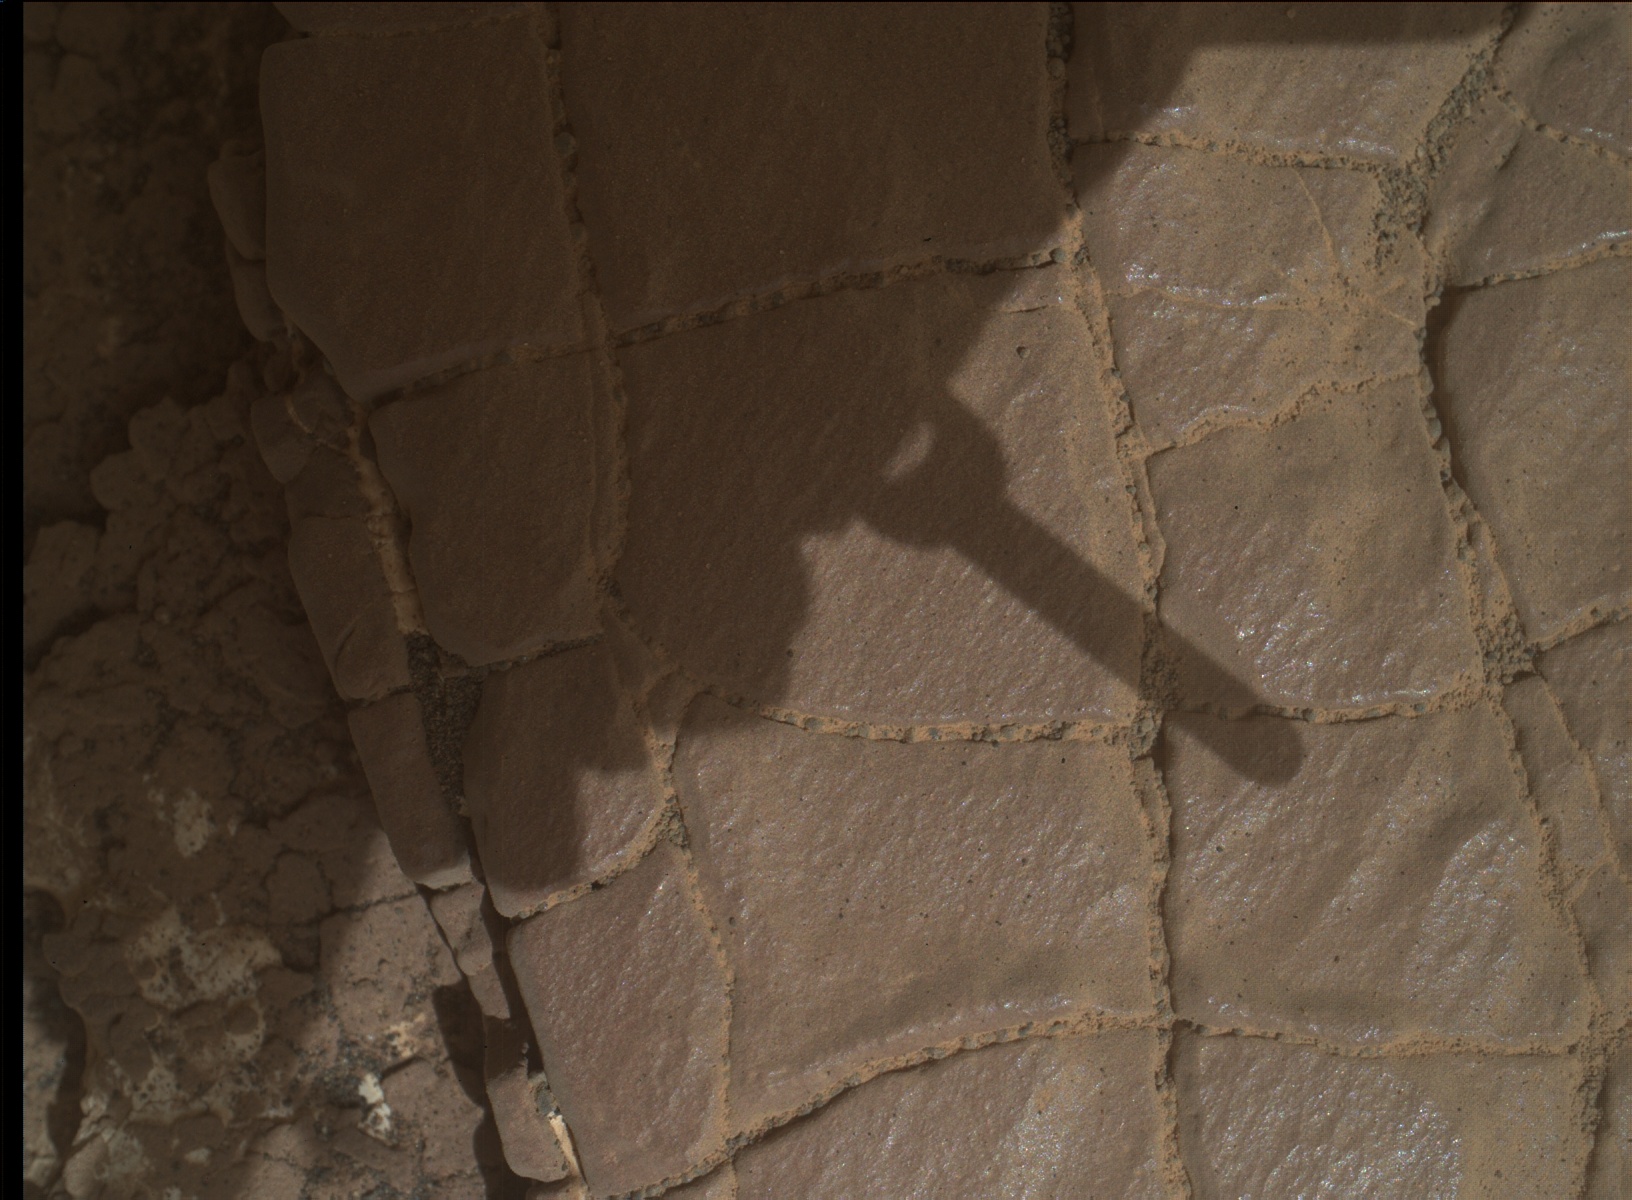 Nasa's Mars rover Curiosity acquired this image using its Mars Hand Lens Imager (MAHLI) on Sol 2422